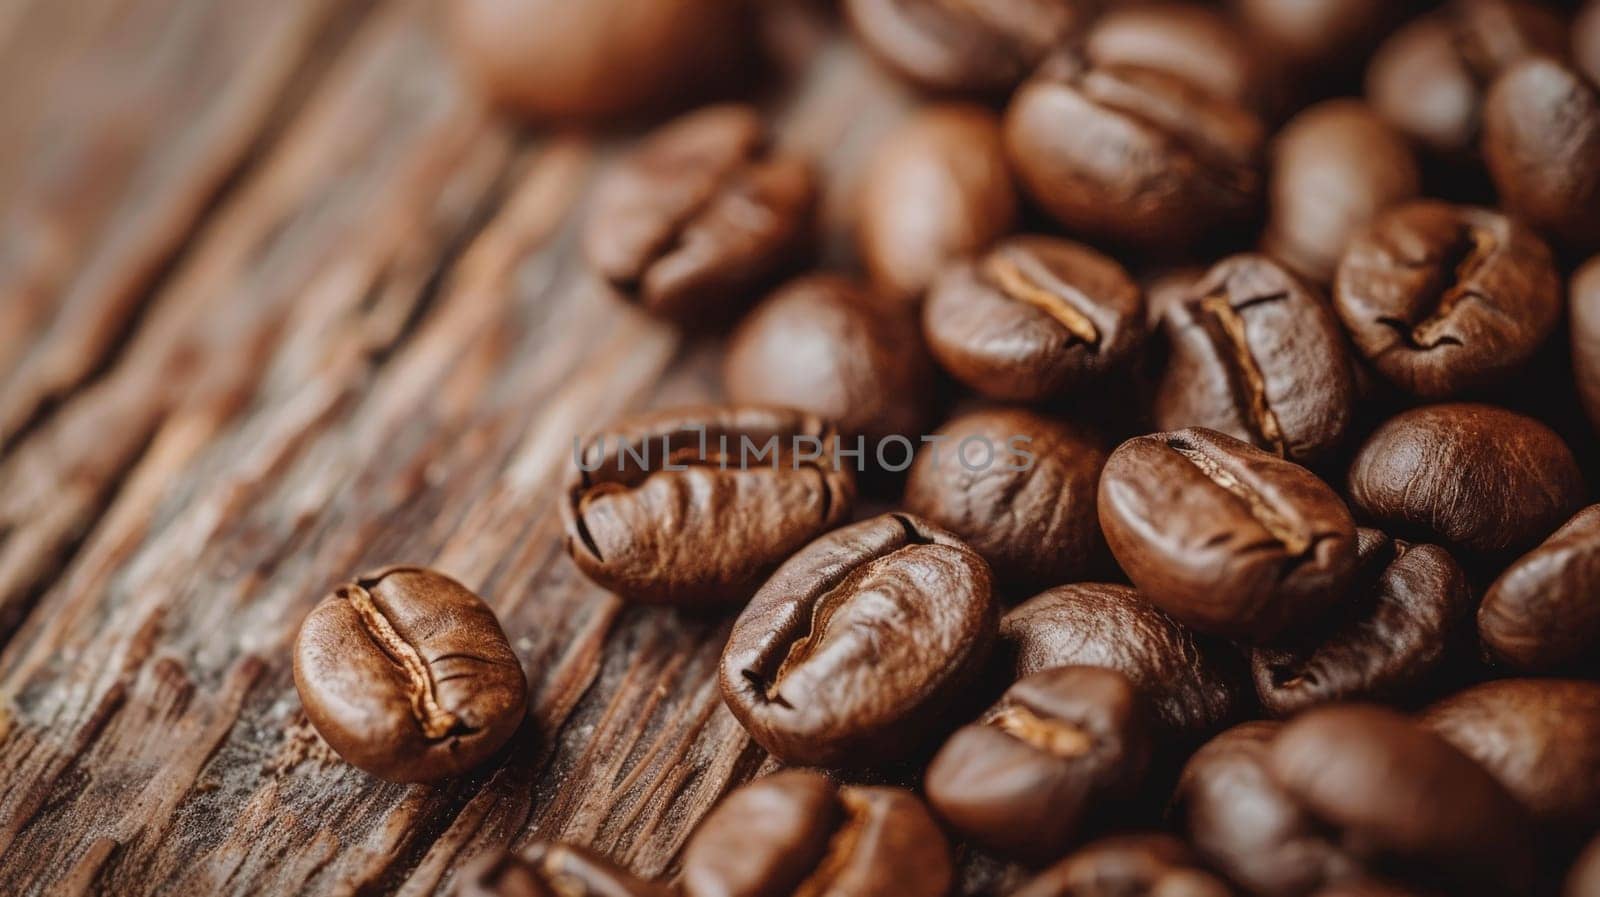 A pile of coffee beans on a wooden surface by nijieimu